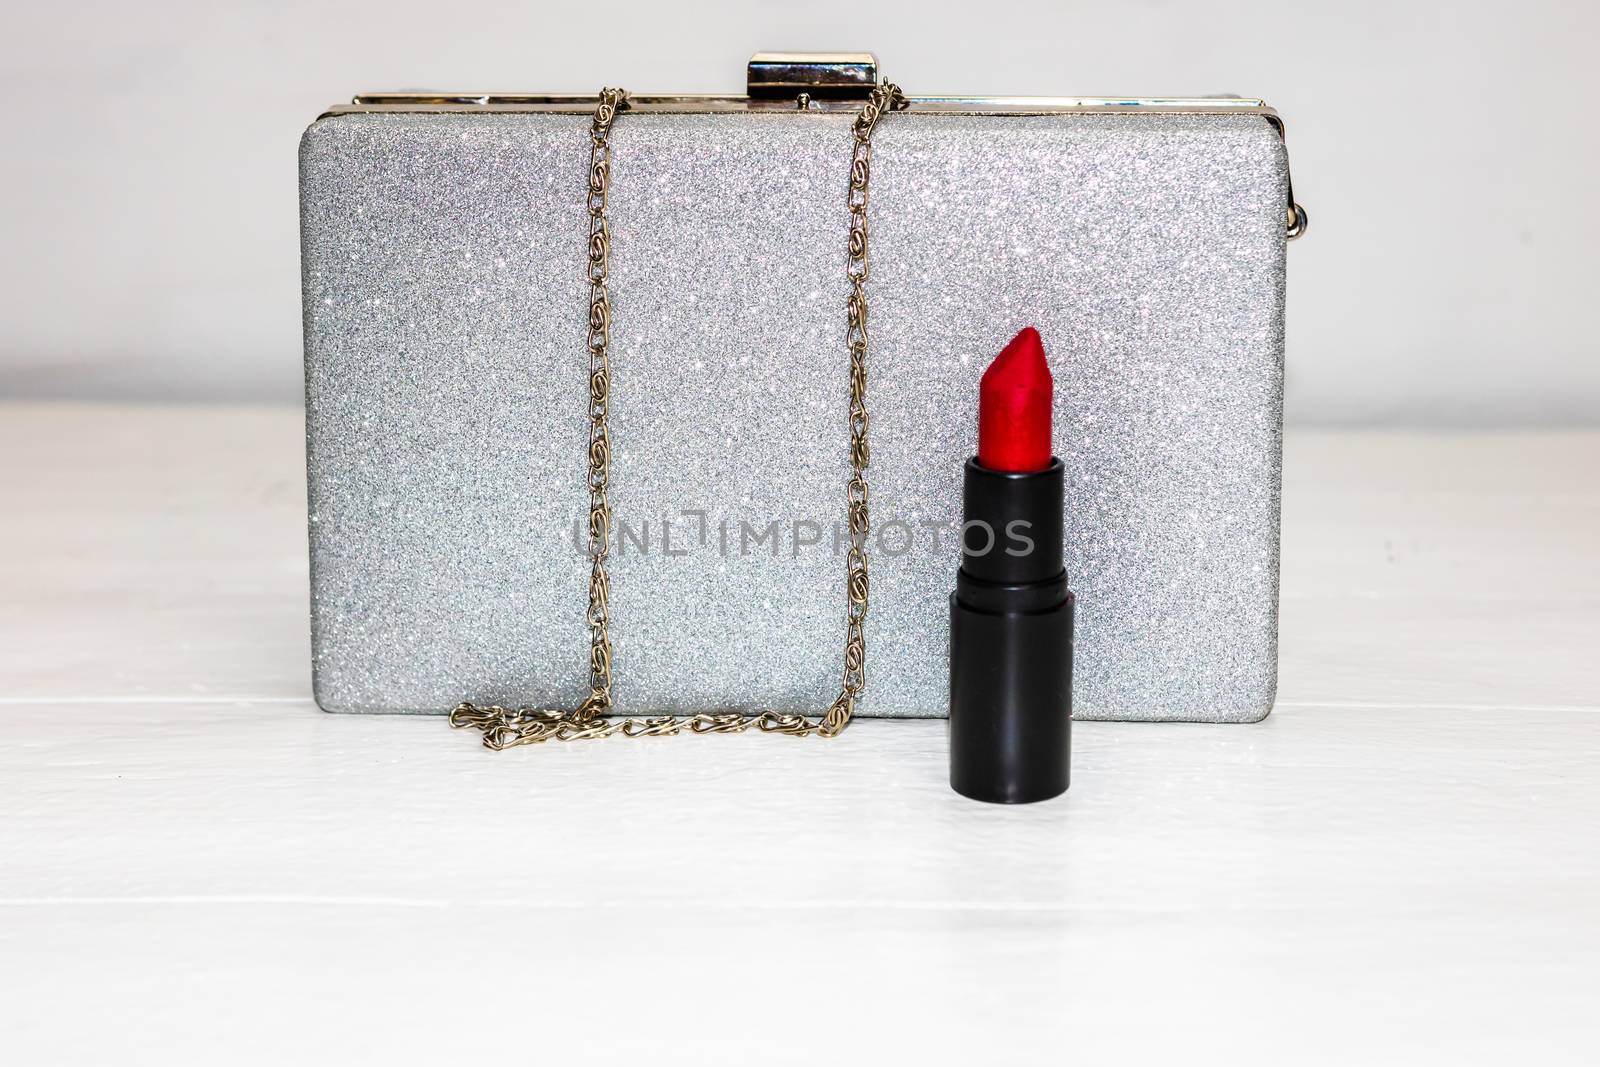 Glittery silver clutch bag with red lipstick isolated on white b by vladispas